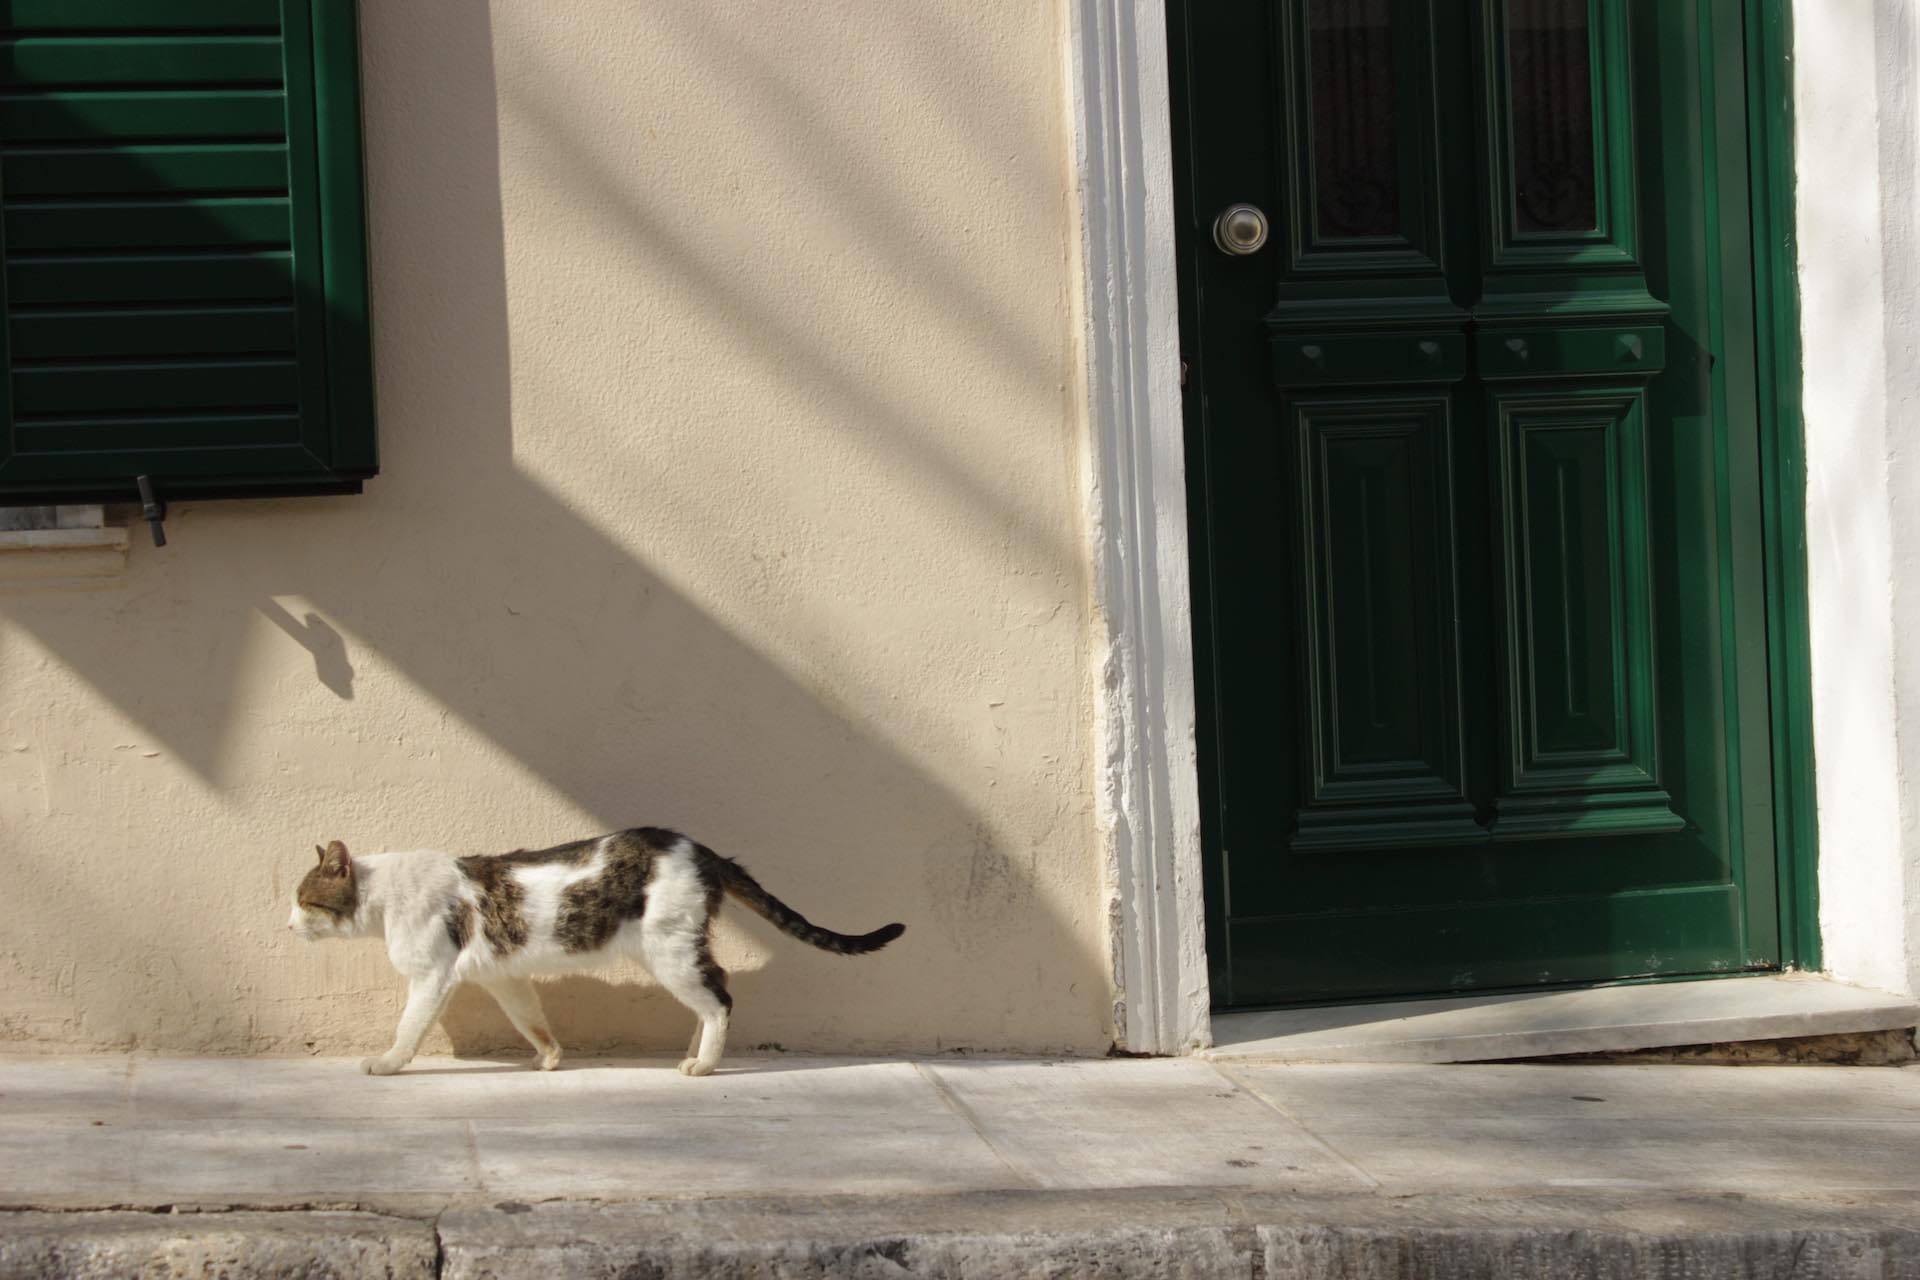 Photograph of cat walking along wall with green door. Wildlife photography.